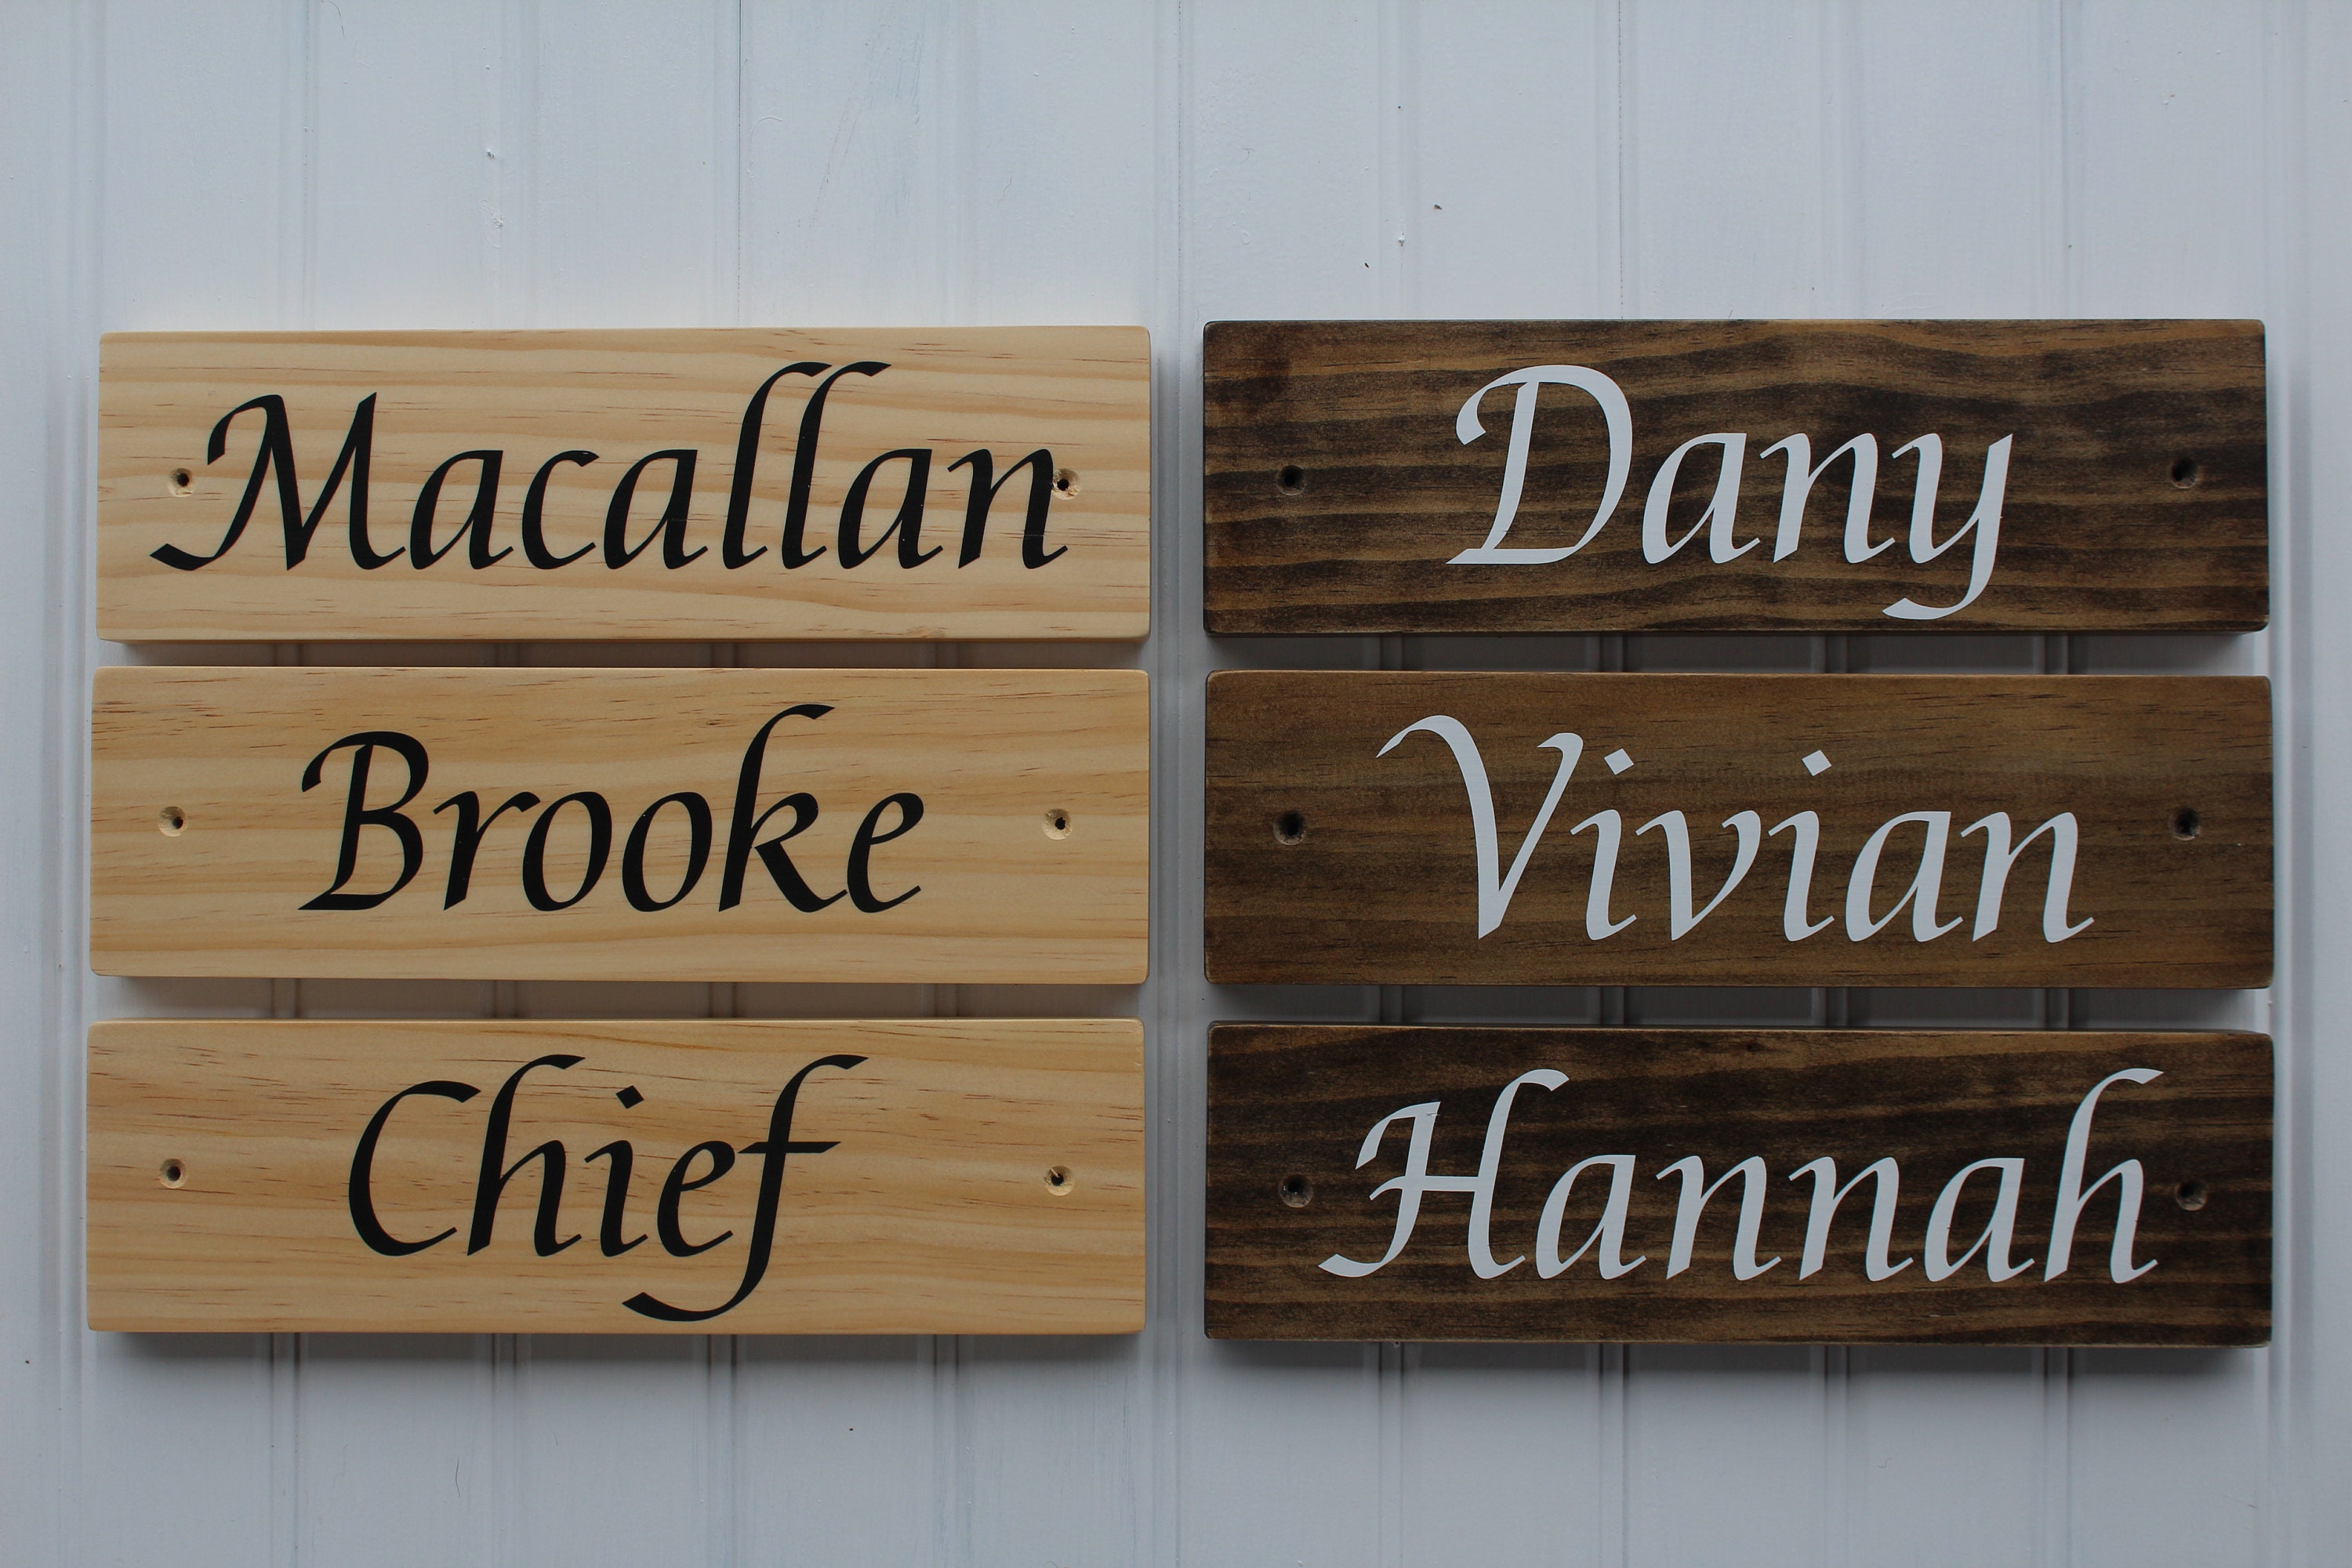 Plank Craft Wood tall Rustic Sign Hobby Board/wooden Project Wall